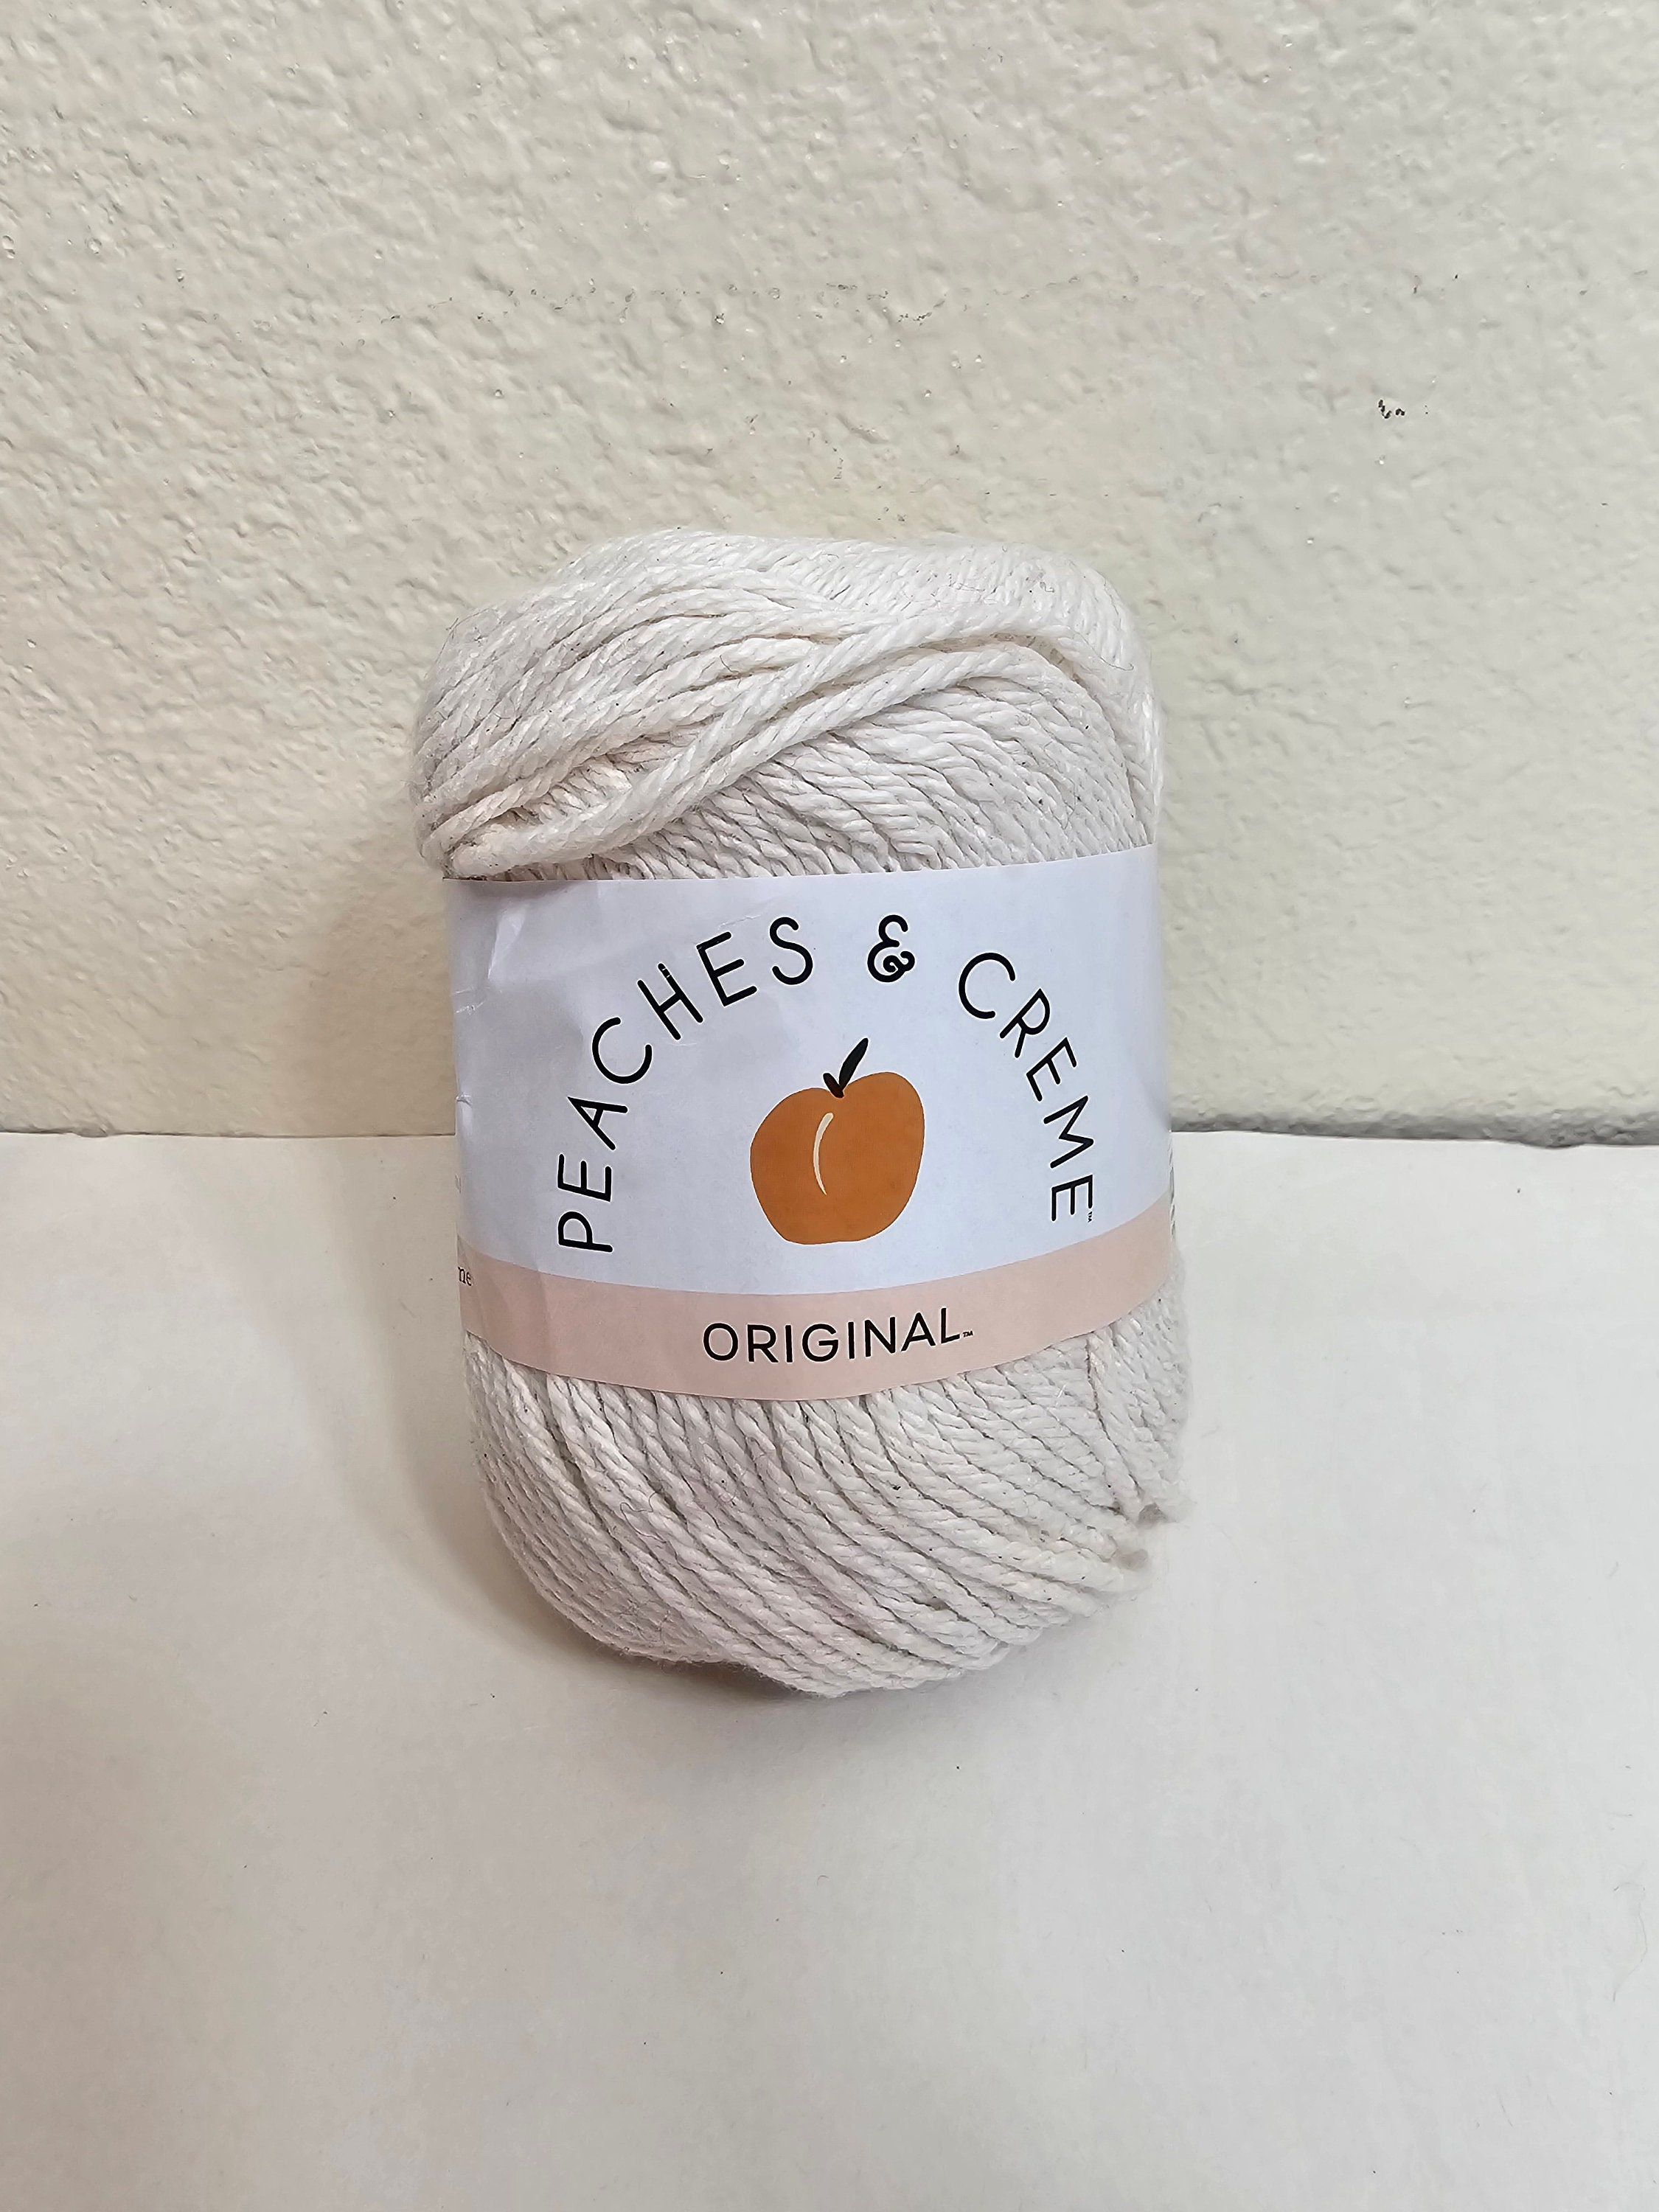 Cotton Yarn in Shades of Beige, Peaches and Cream, Variegated Beige Cotton  Yarn, Linen Cotton Yarn 